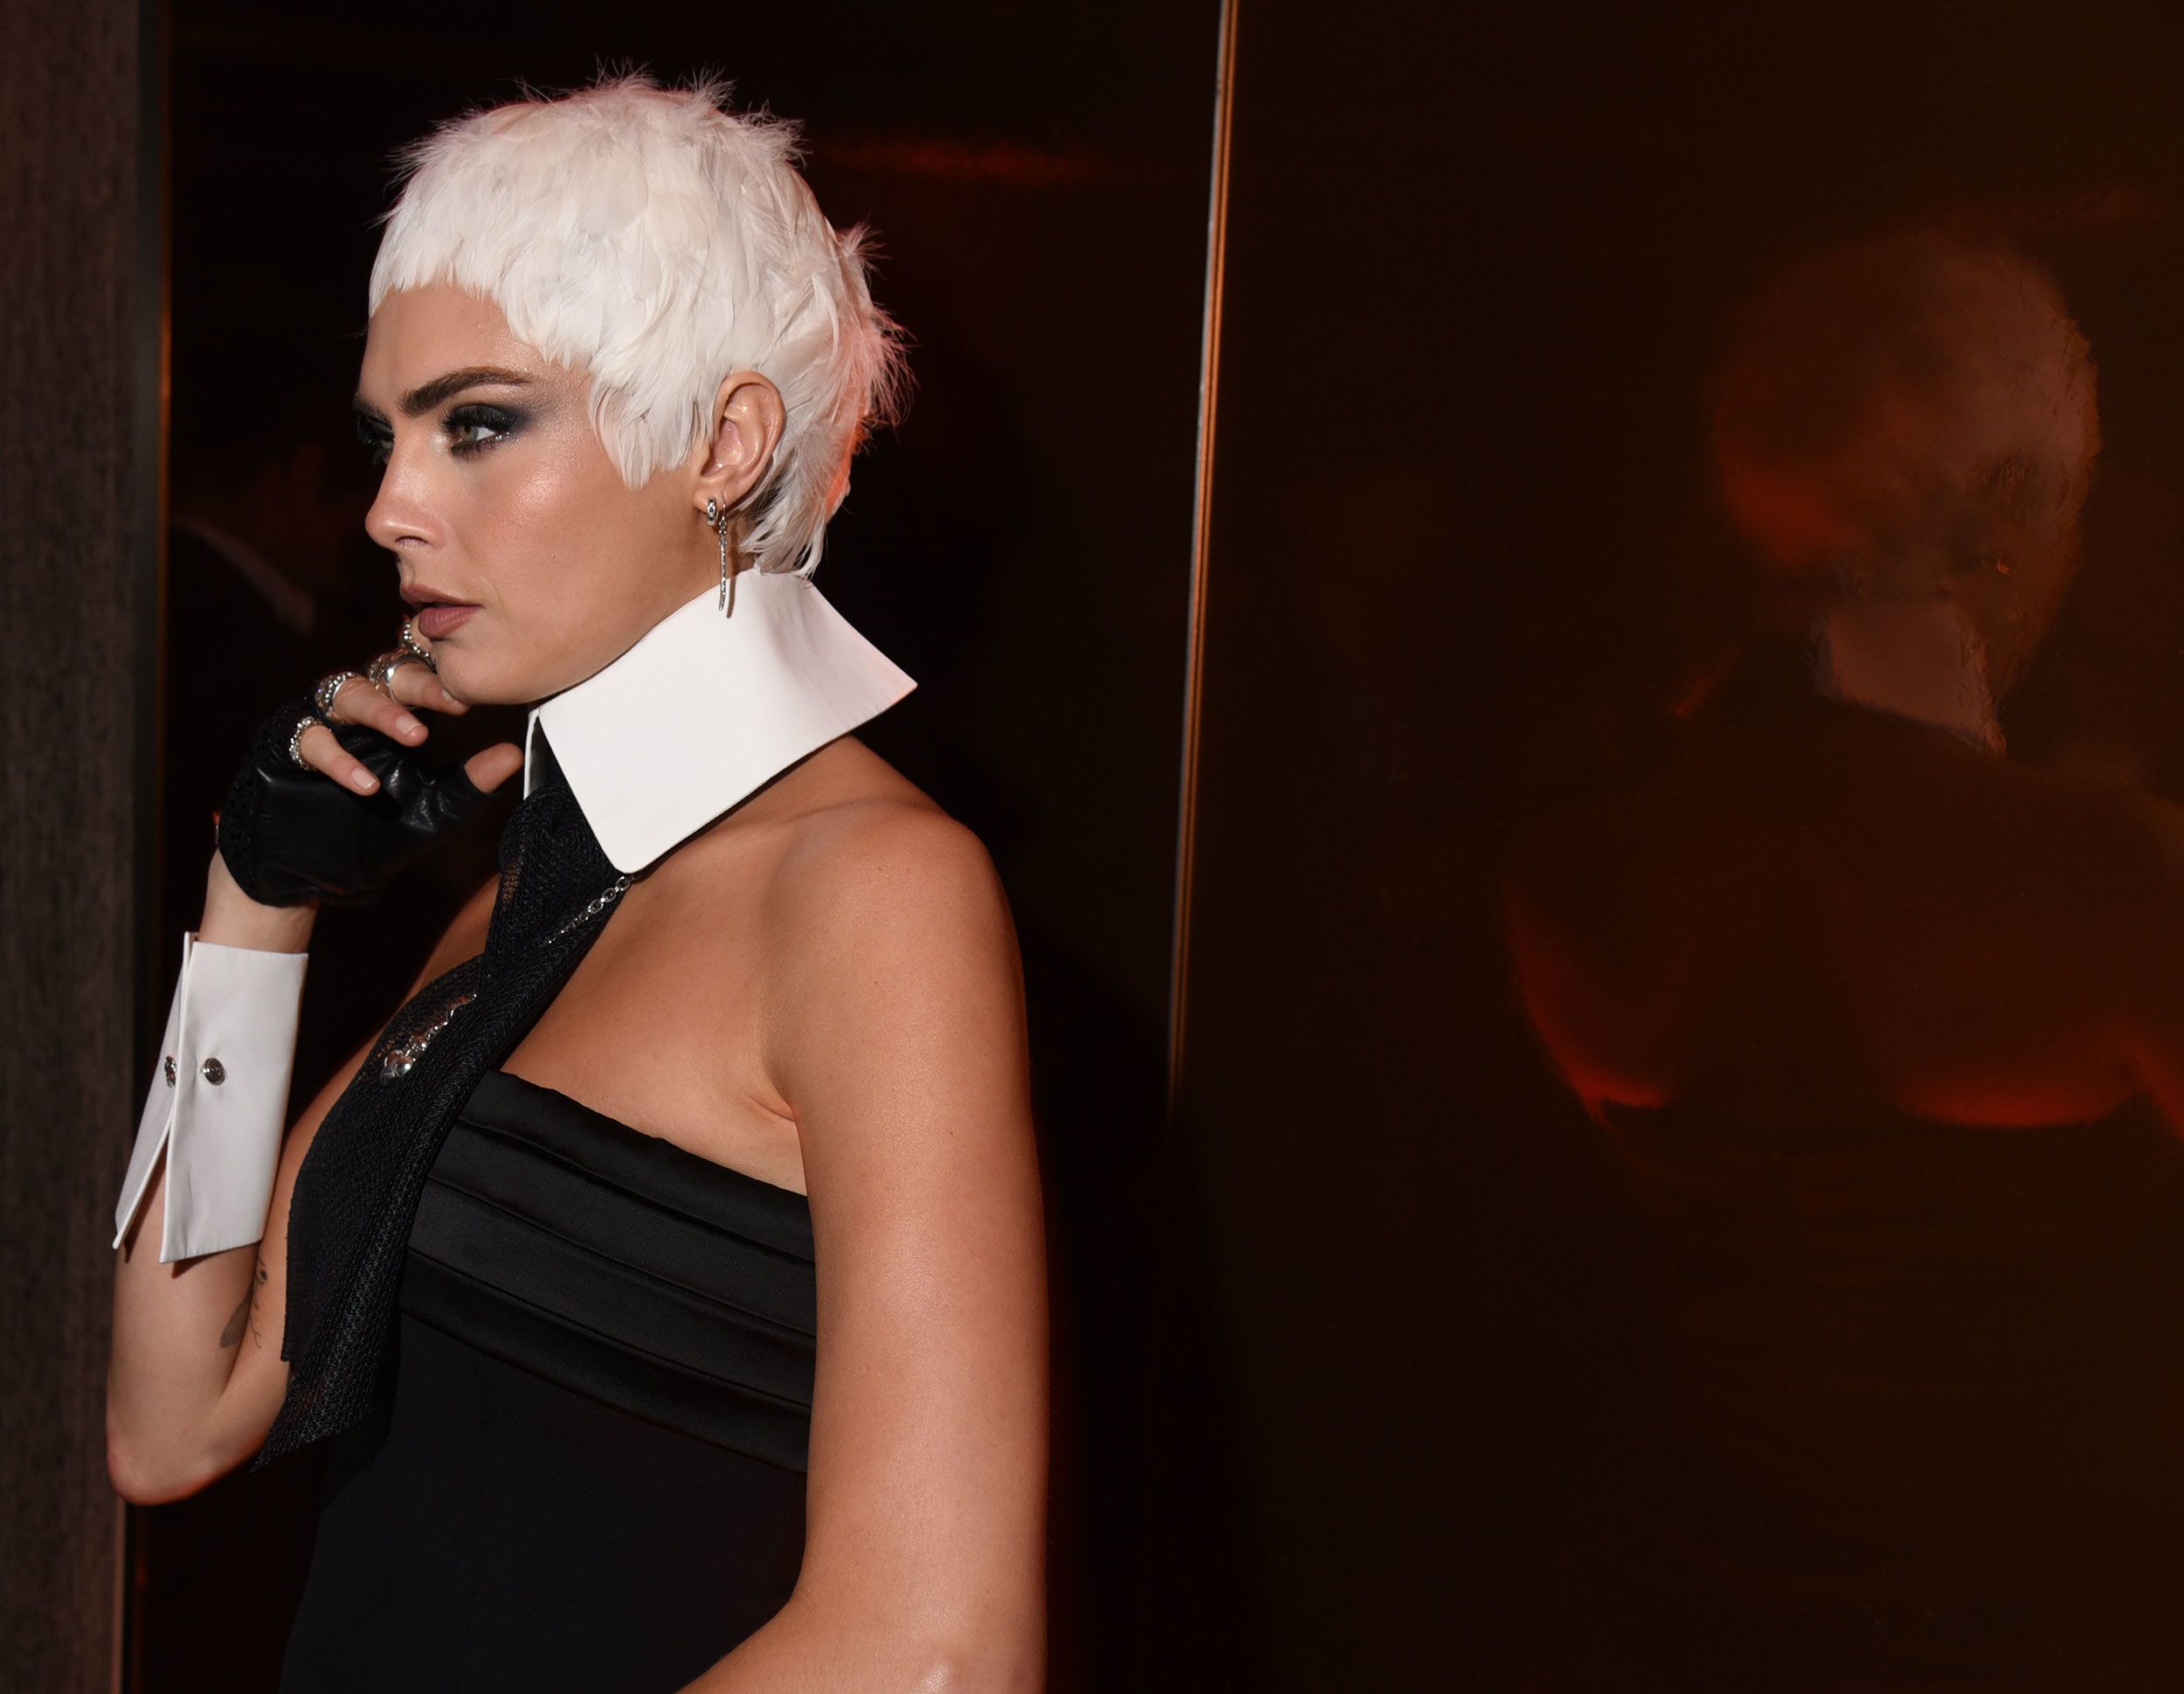 Cara Delevingne gets into Karl Lagerfeld cosplay with gray hair